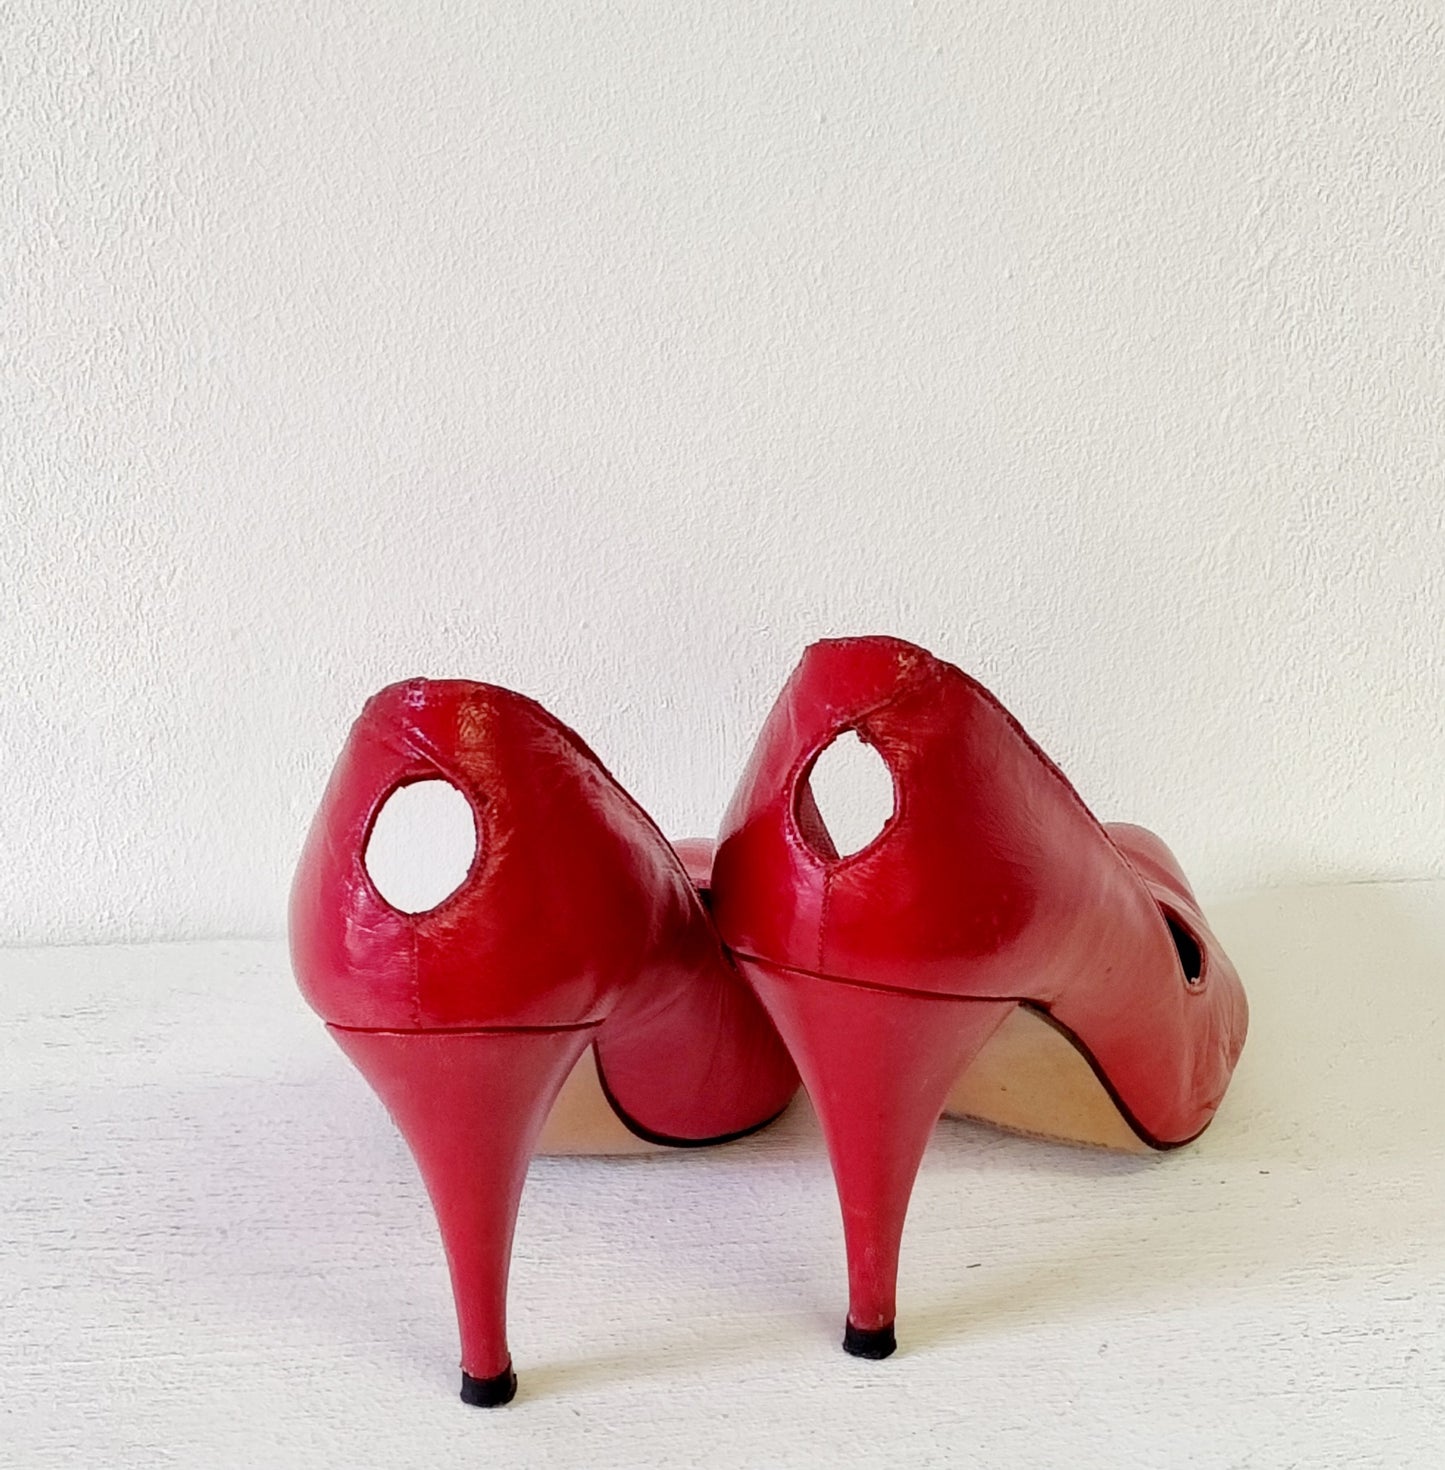 Krems Spain - Red Leather Heeled Court Shoe